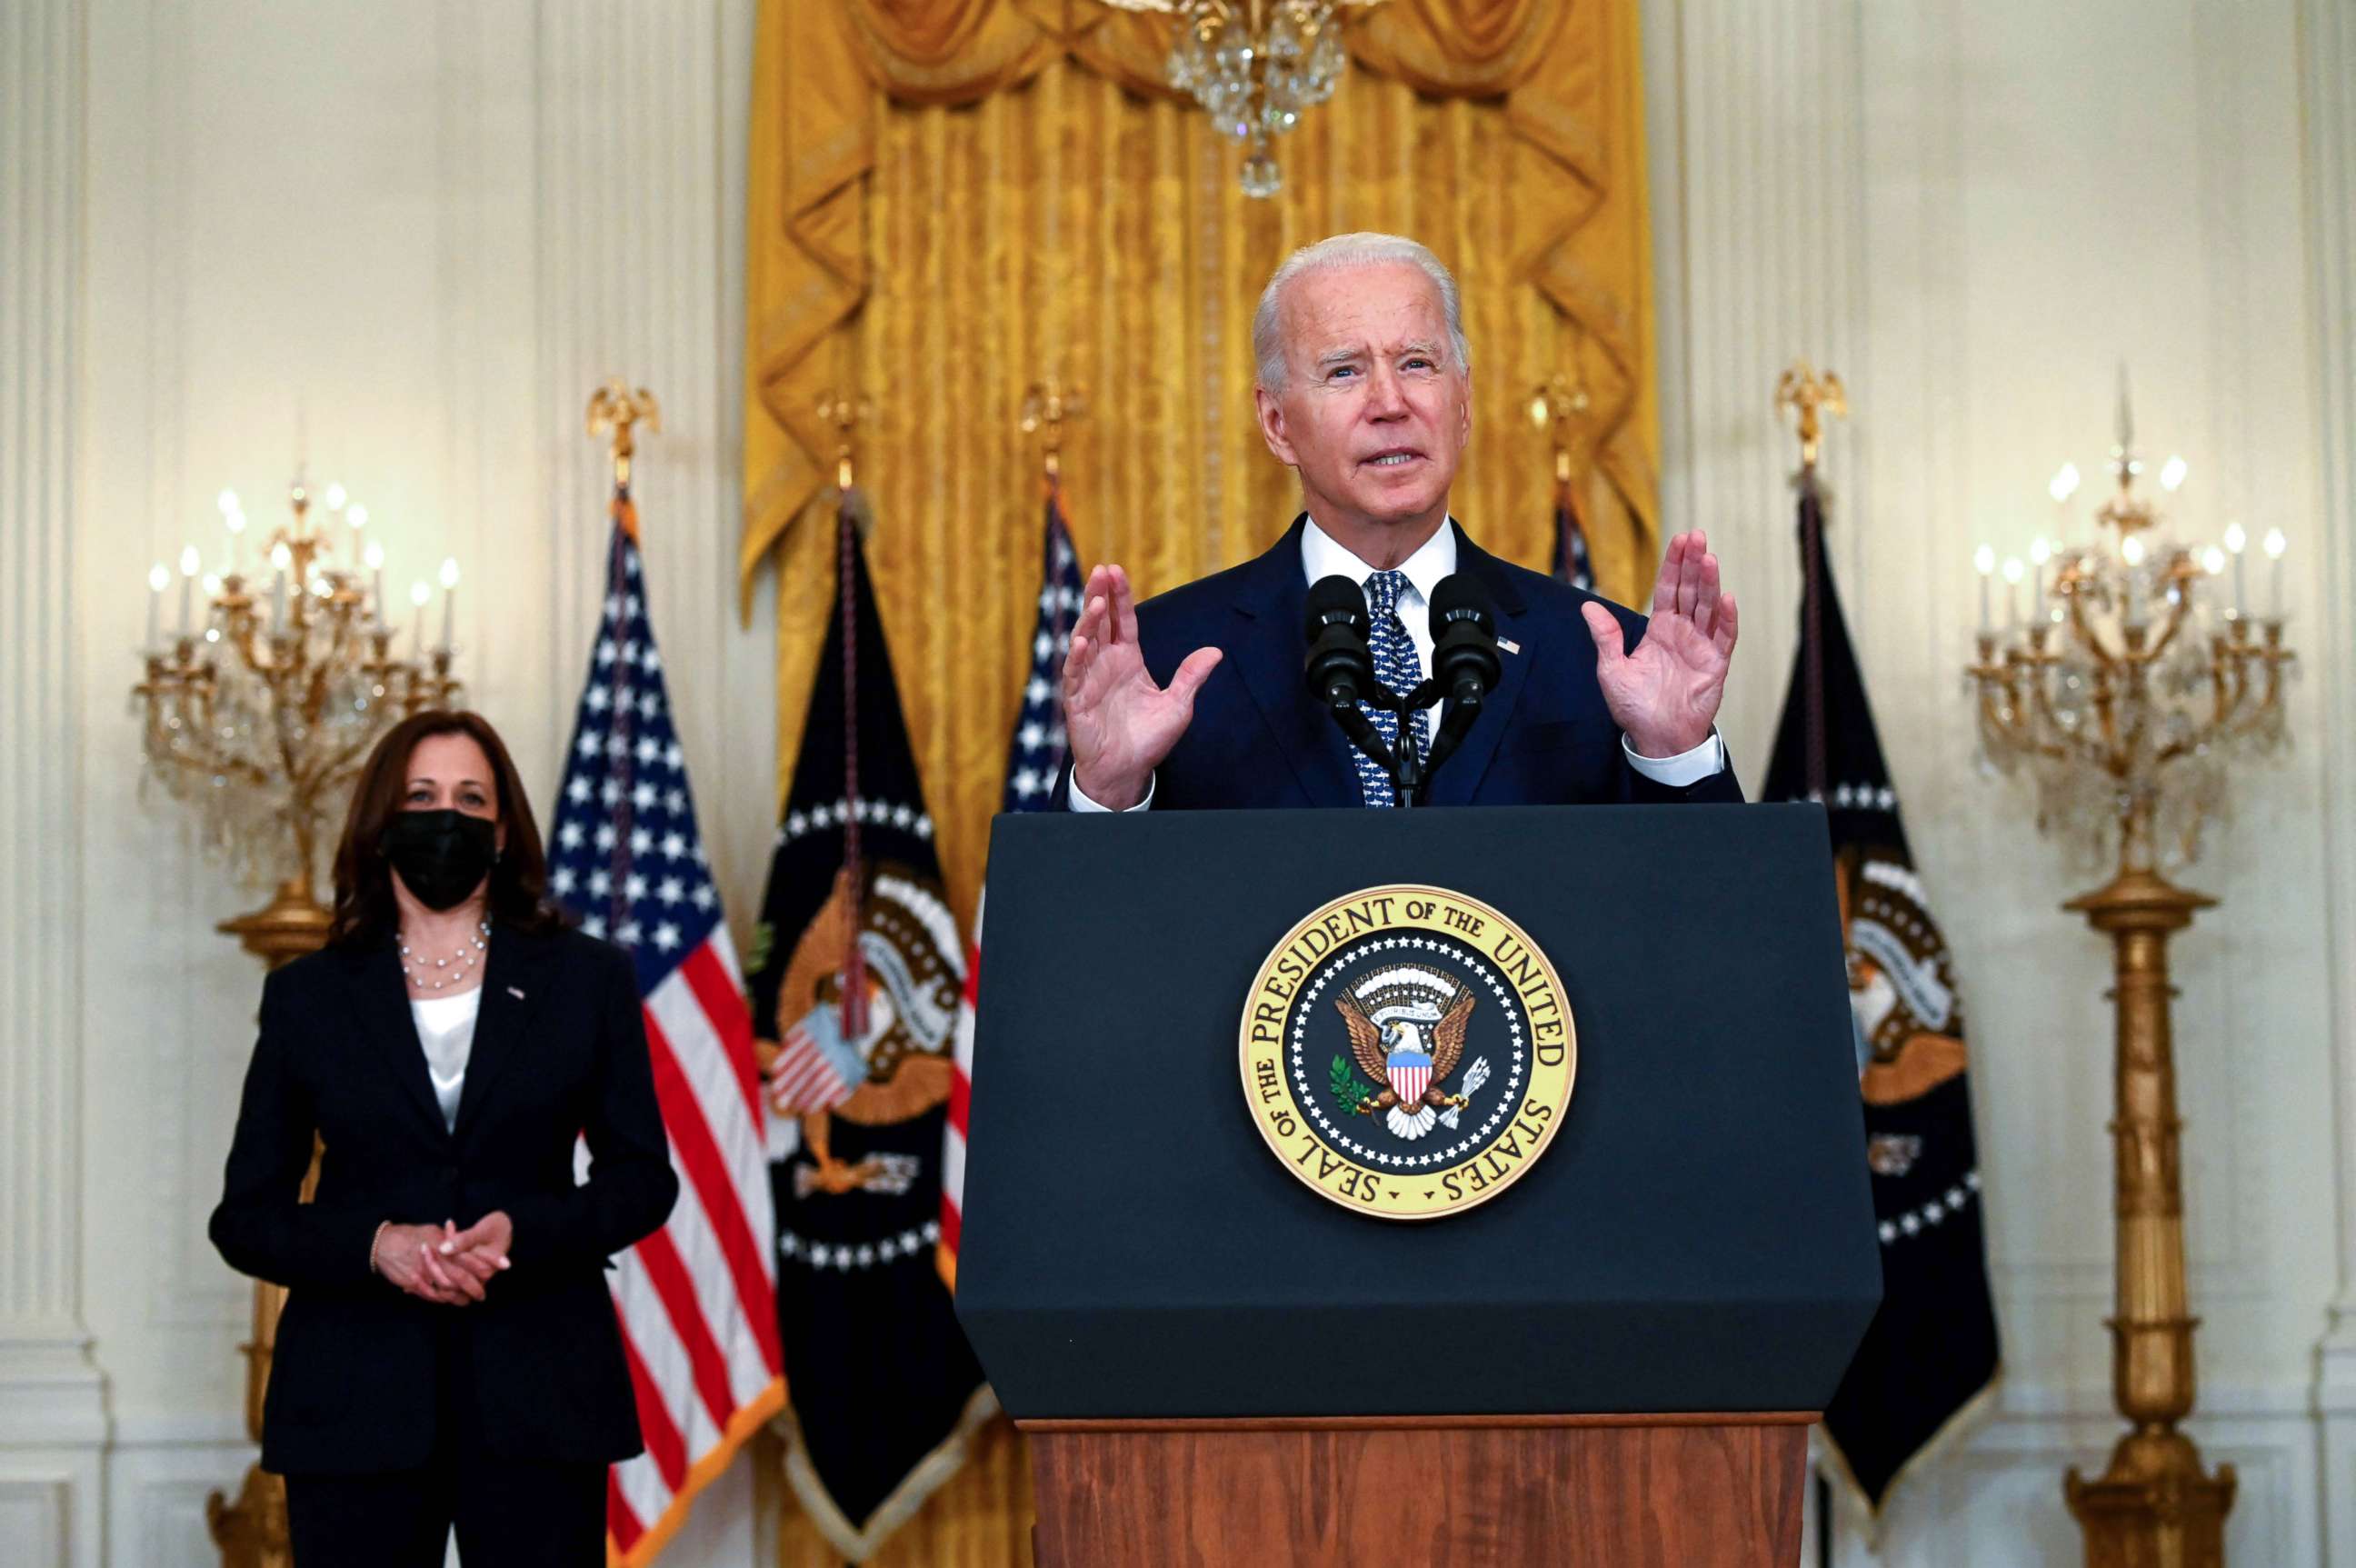 PHOTO: President Joe Biden speaks about the infrastructure bill passed by the Senate on August 10, 2021, in the East Room of the White House in Washington.